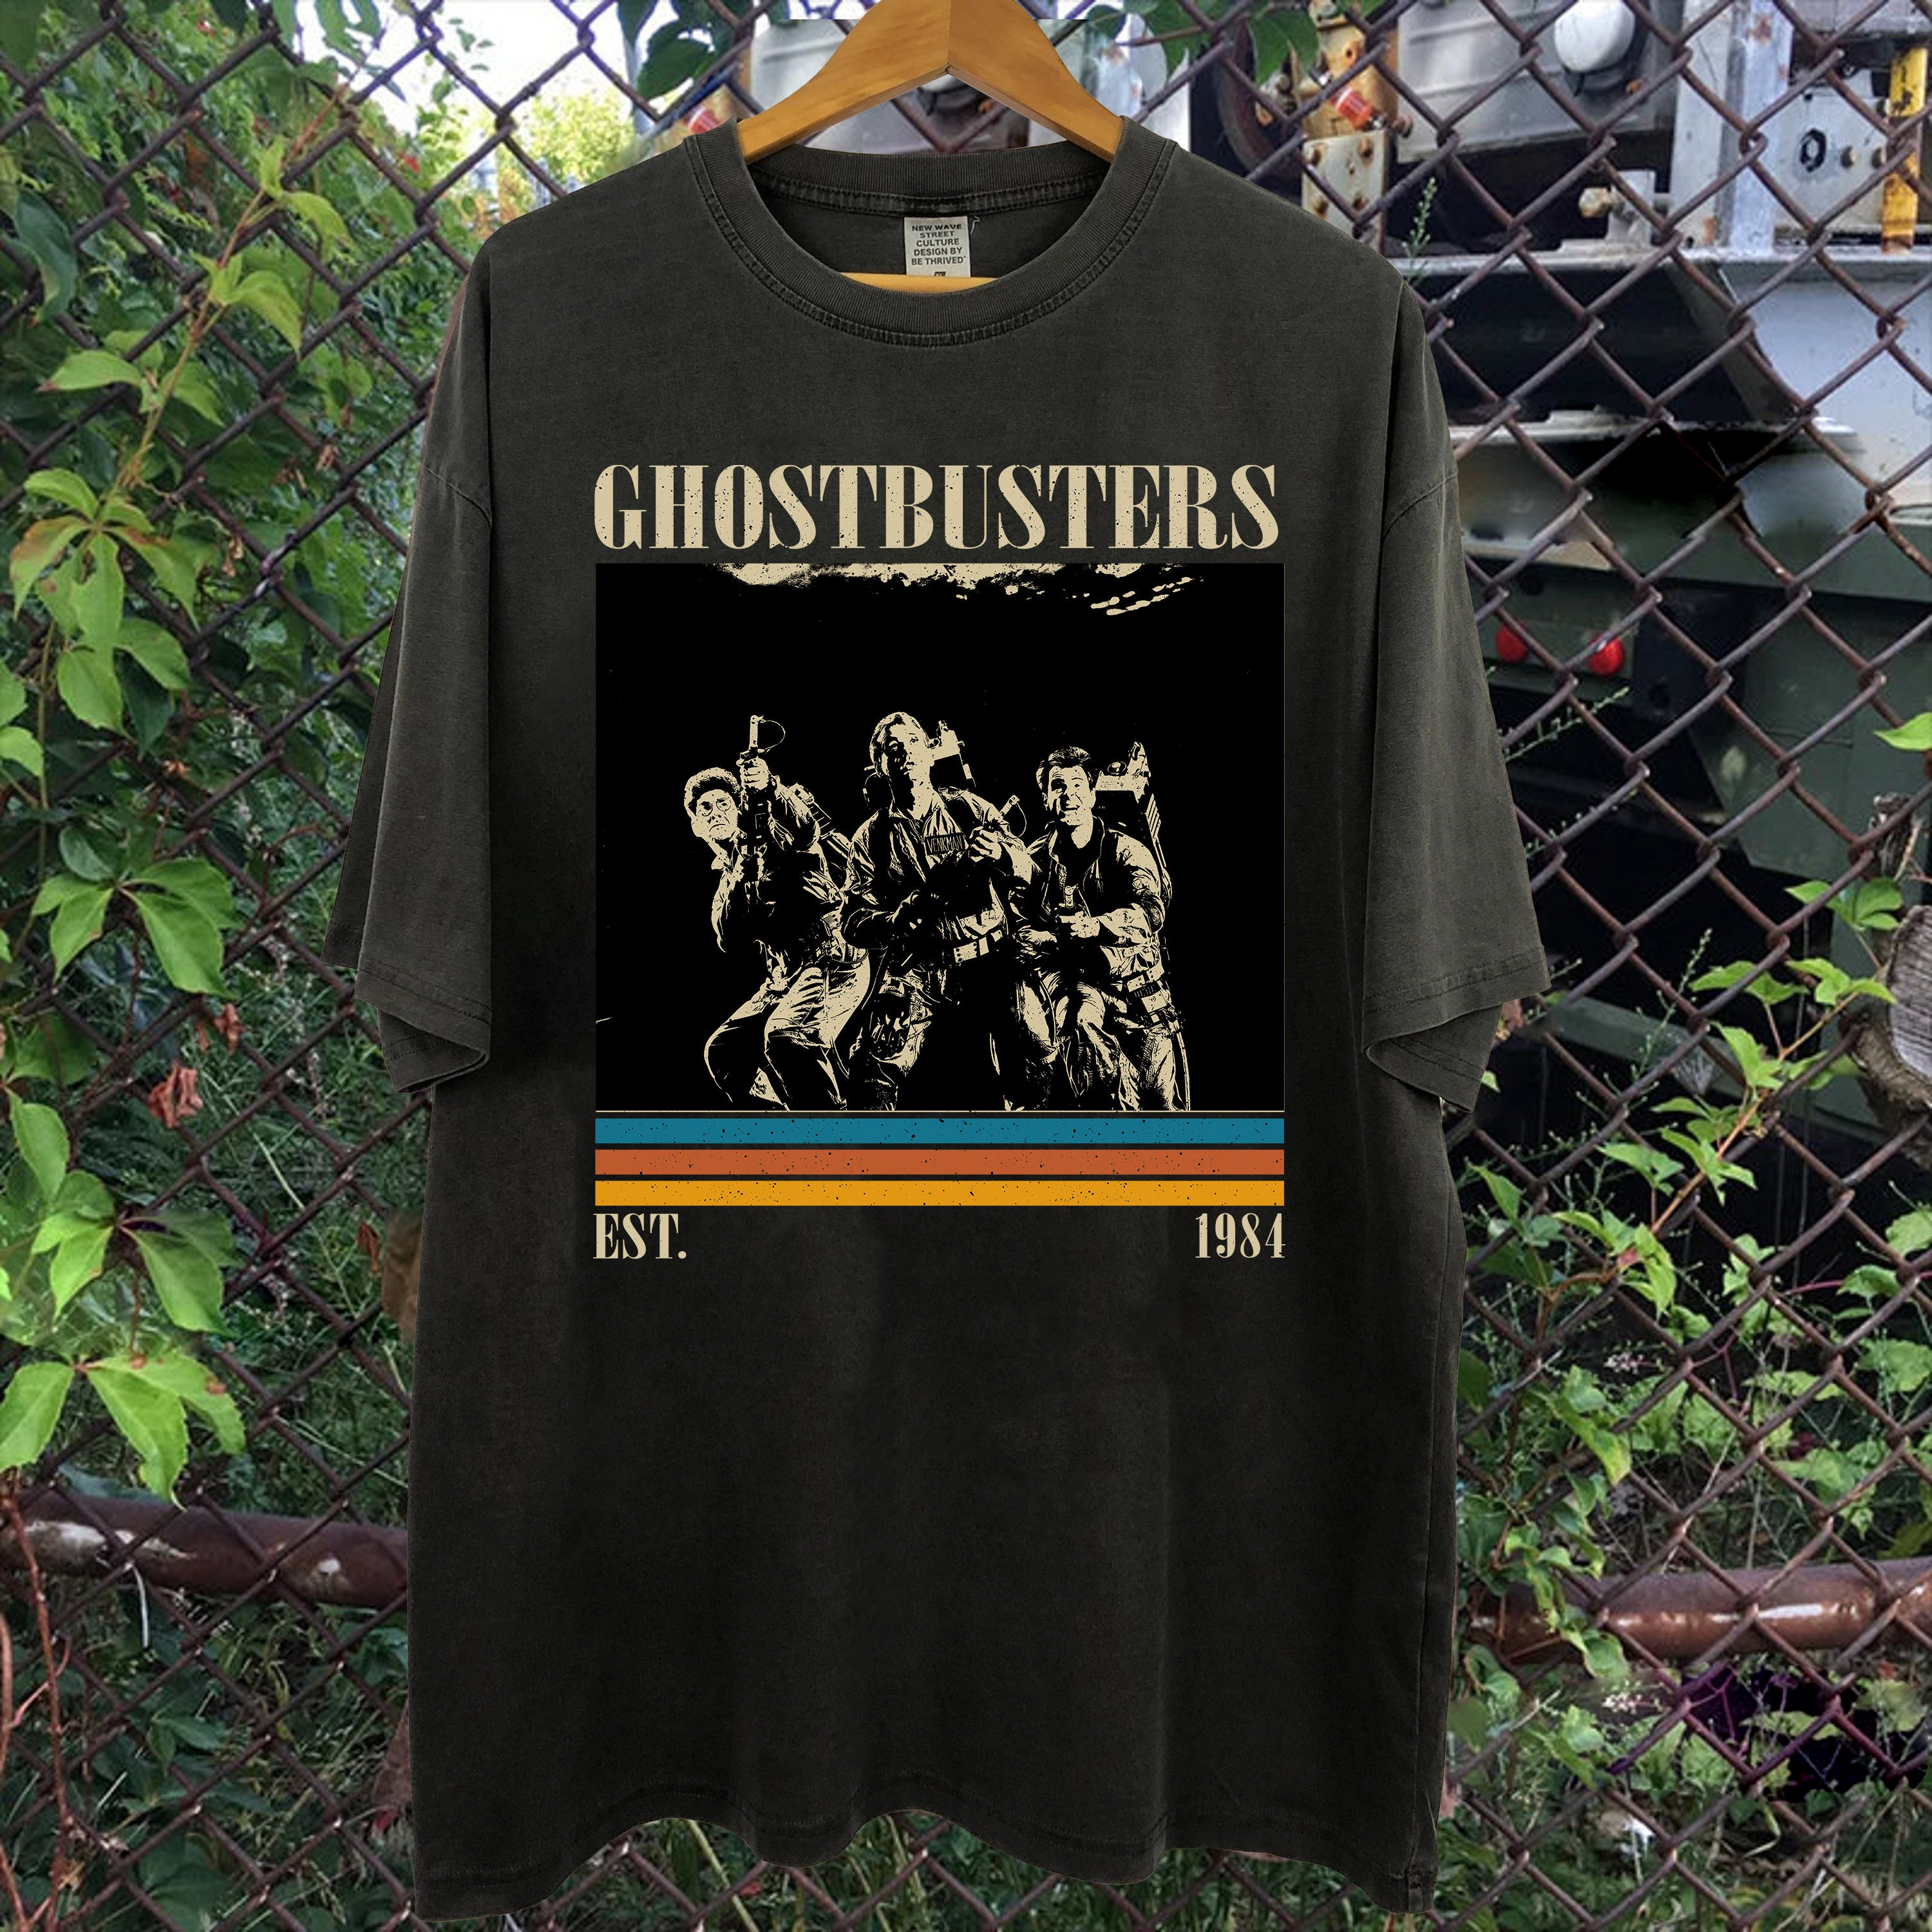 Ghostbusters T Etsy Shirt 